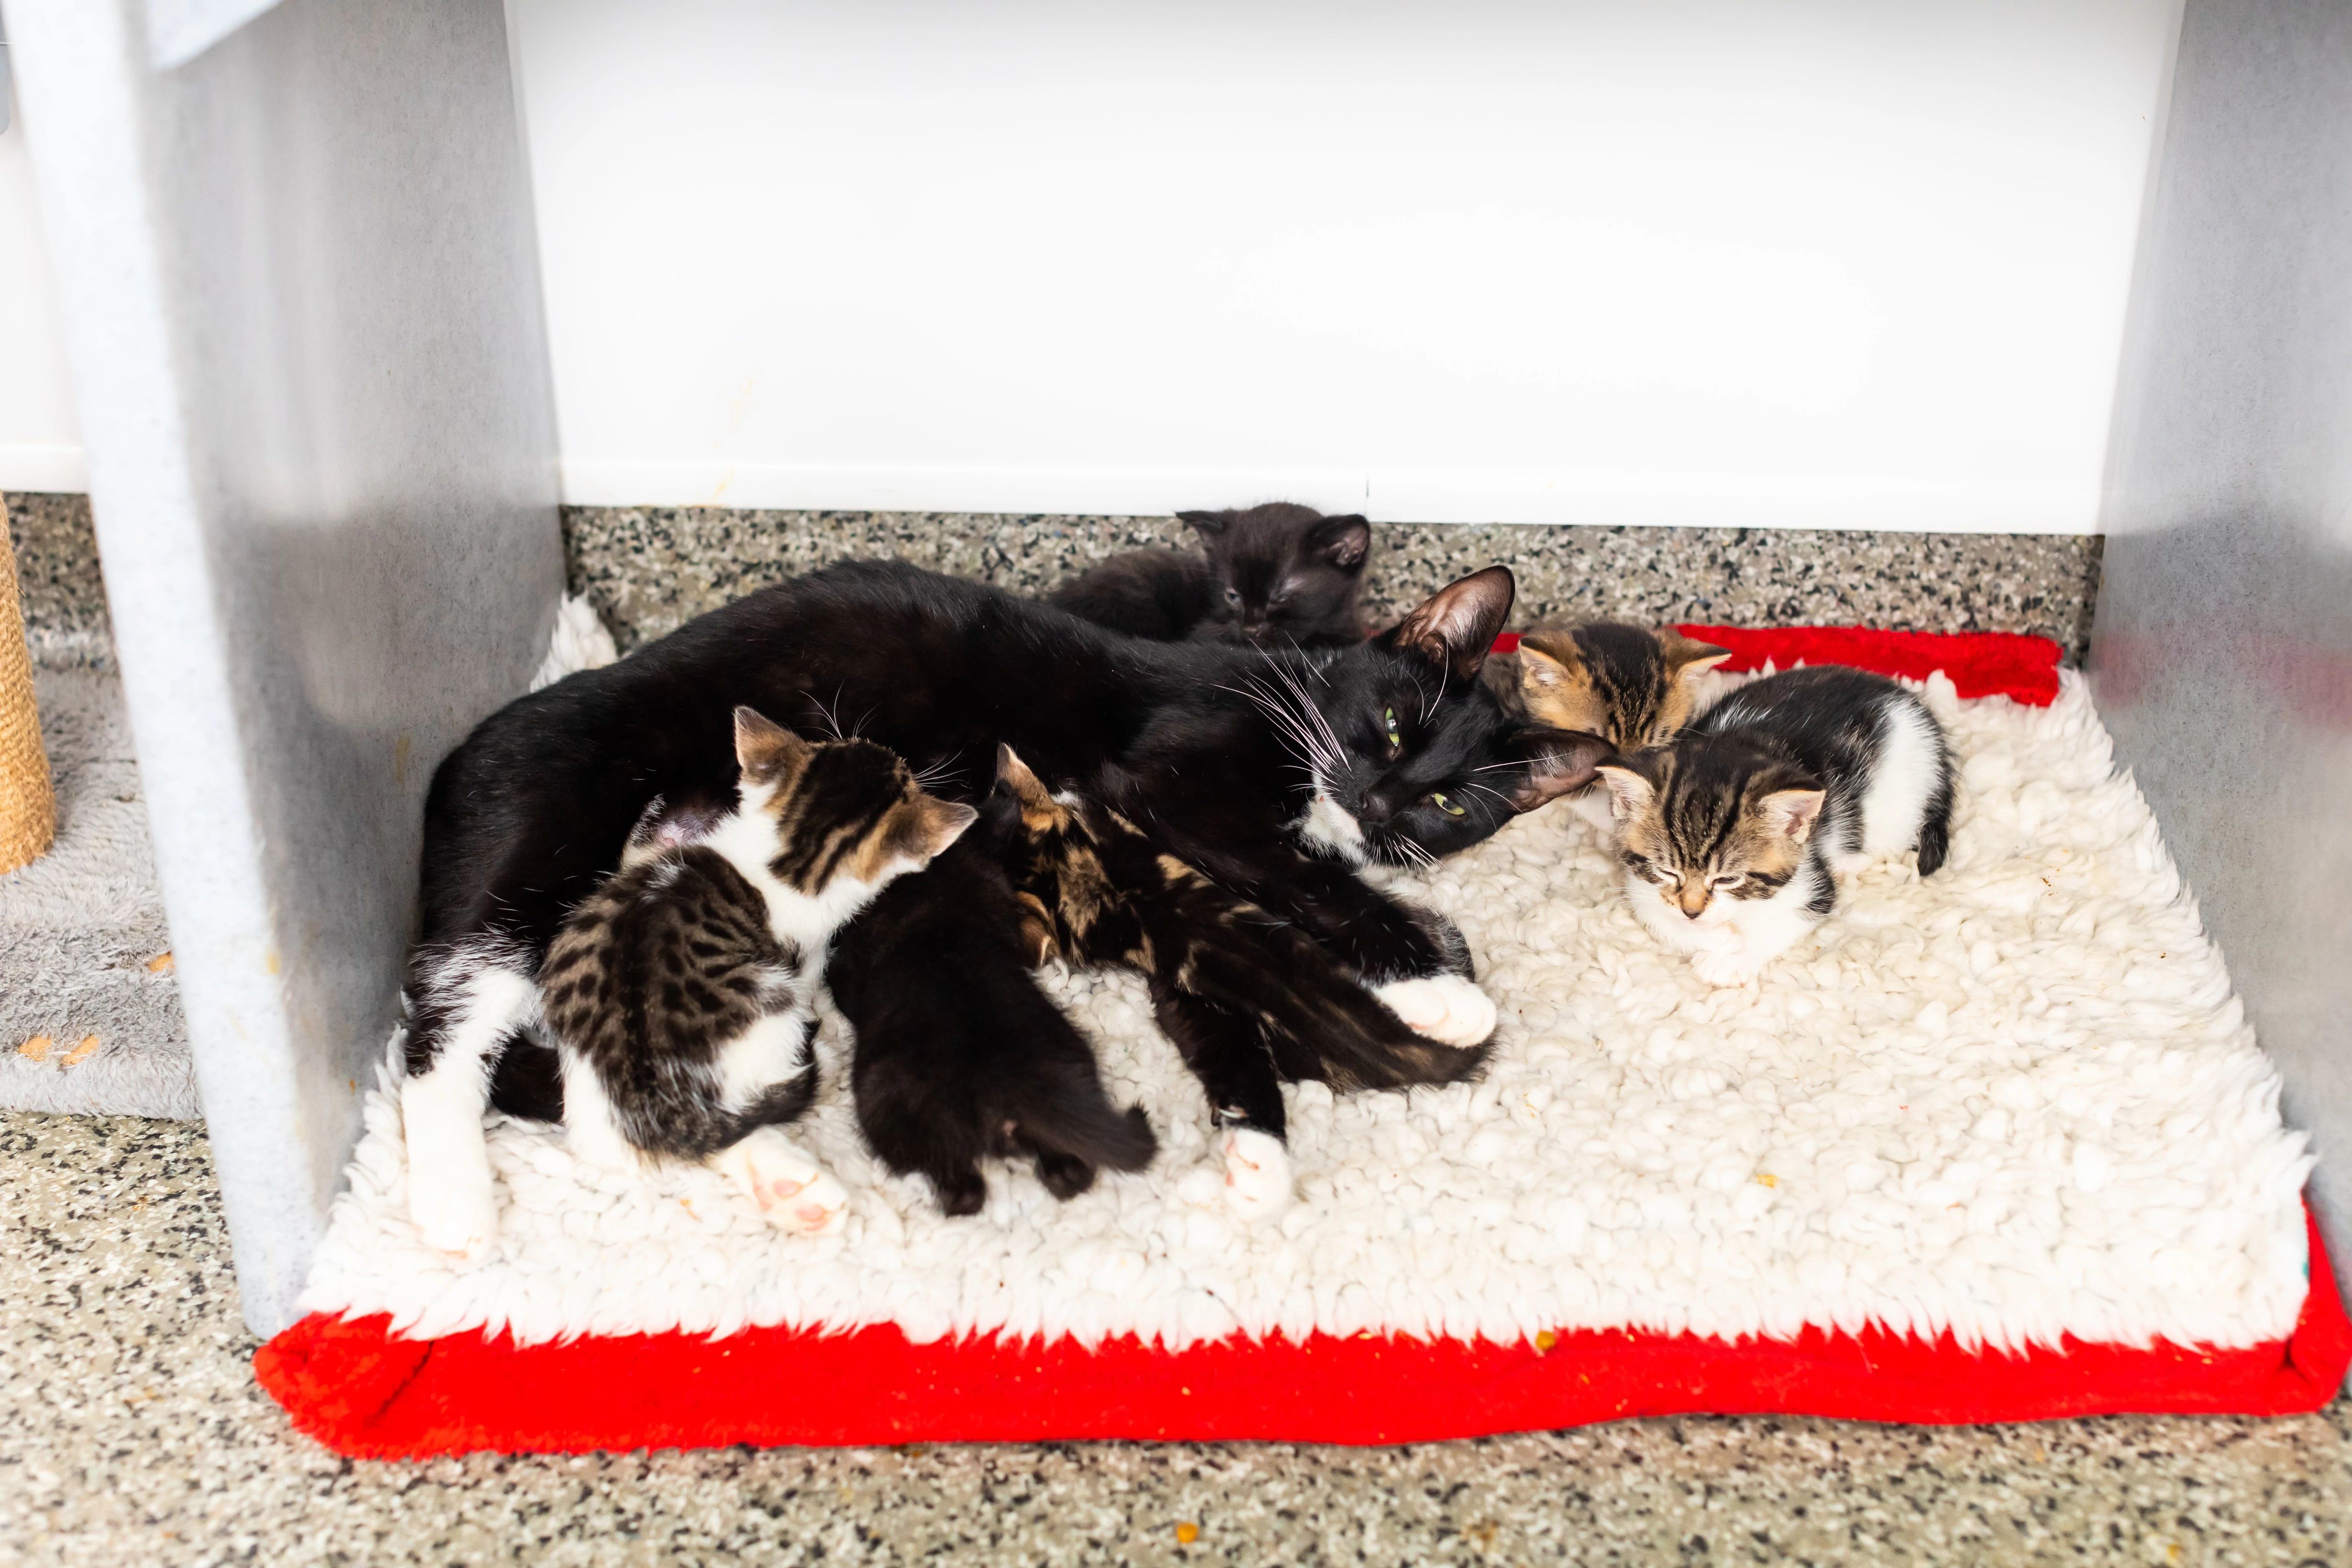 Black-and-white cat lying on a fleece blanket with a litter of six kittens, some black-and-white, others brown tabby-and-white, nursing on her nipples